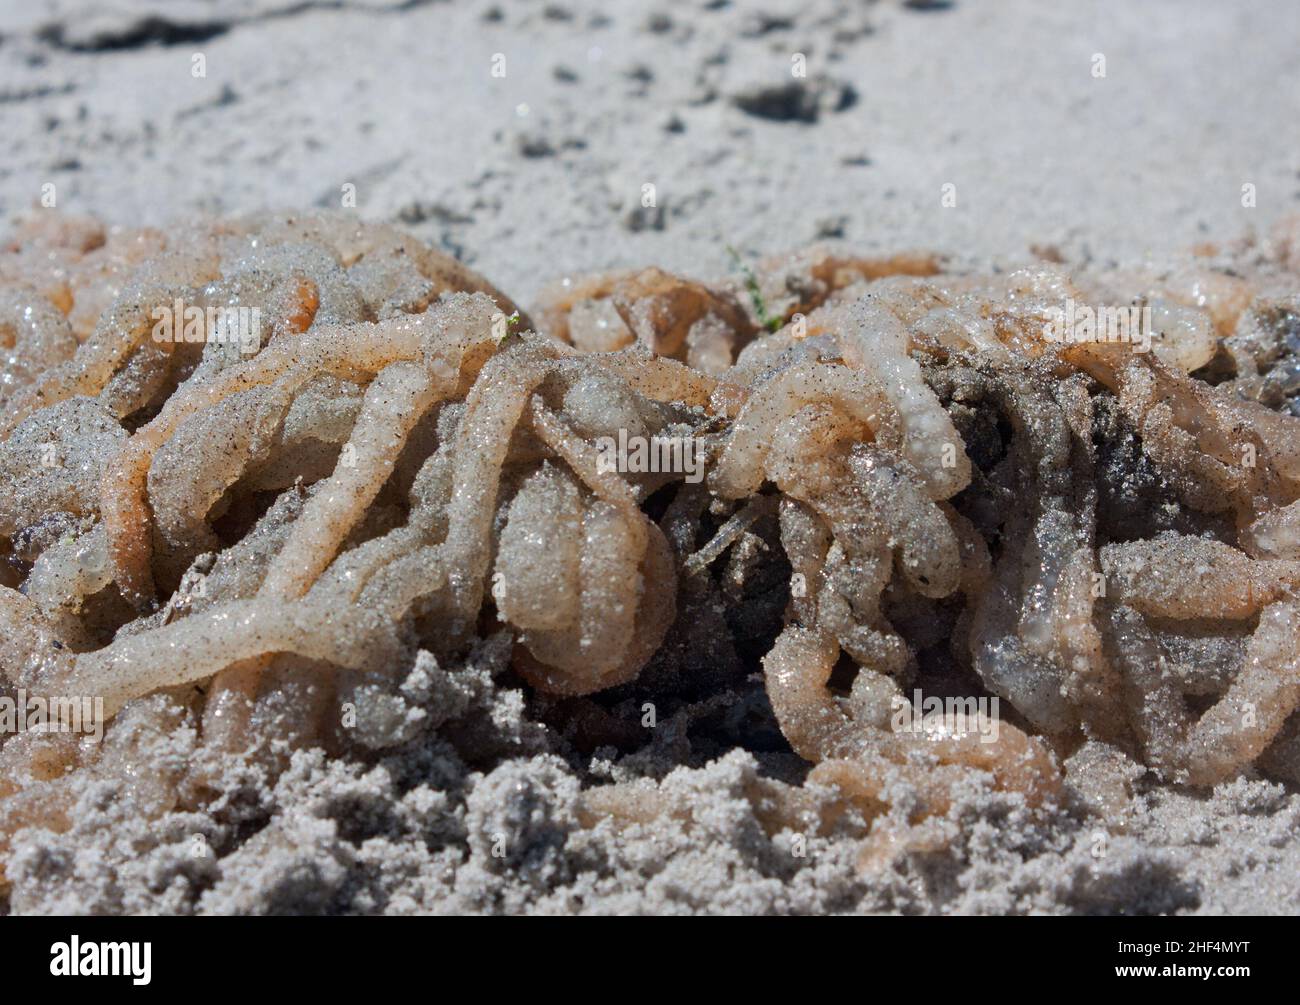 A messy tangled egg mass of European squid, washed up on the beach Stock Photo